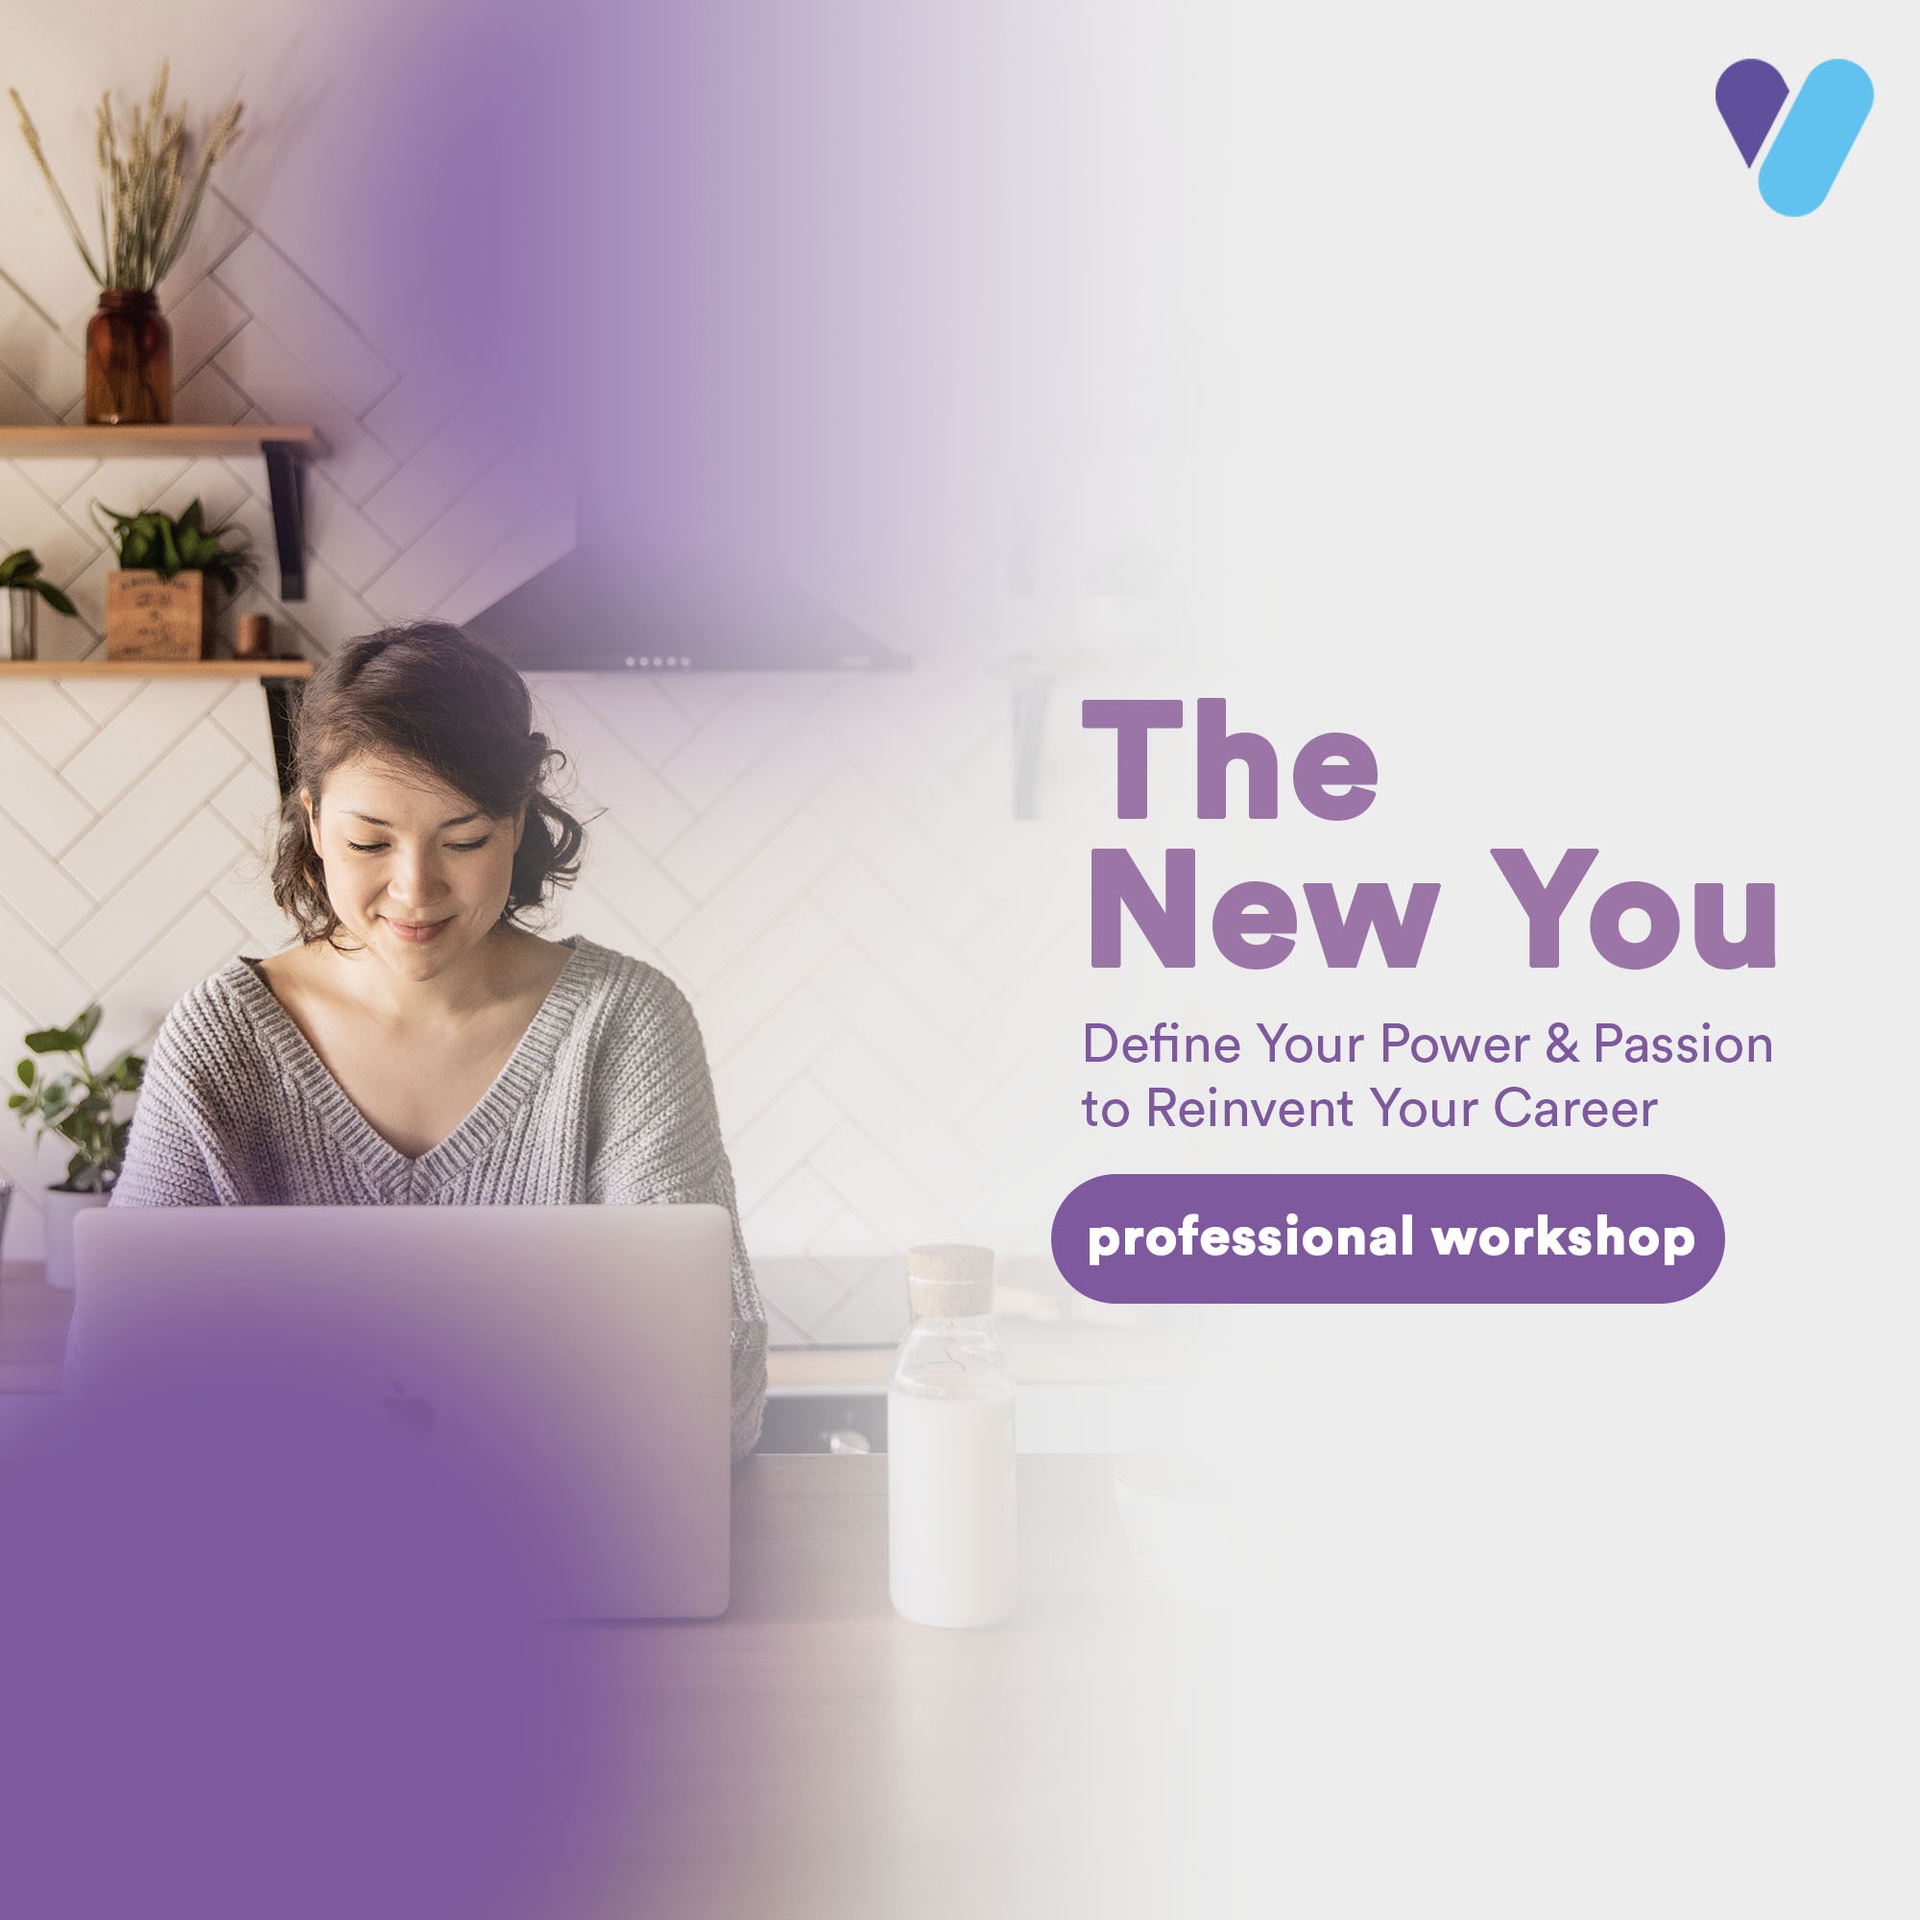 The New You: Define Your Power & Passion to Reinvent Your Career